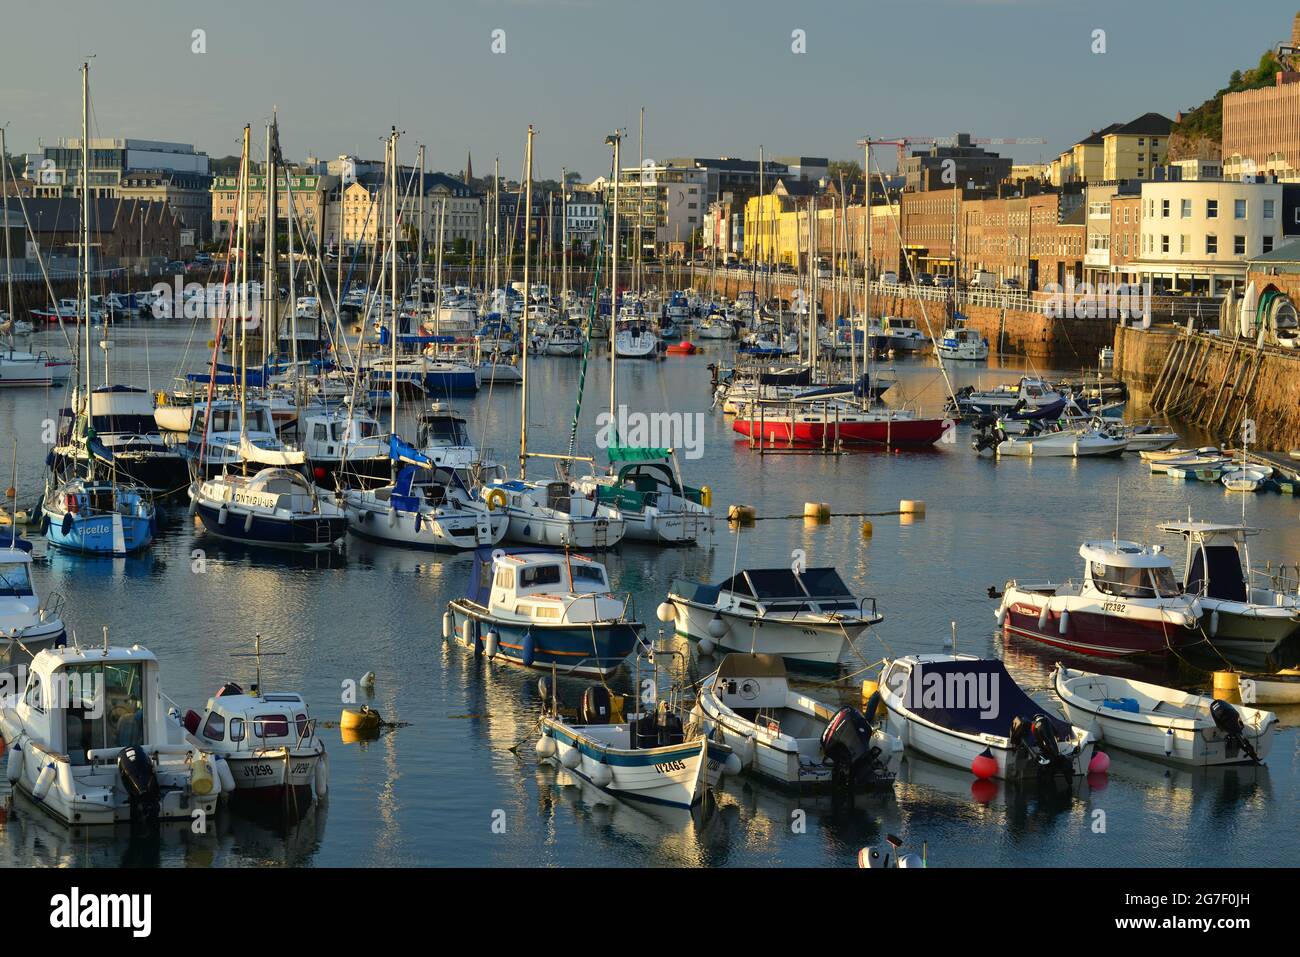 St Helier marina, Jersey, U.K. Summer view of town at high tide Stock Photo  - Alamy